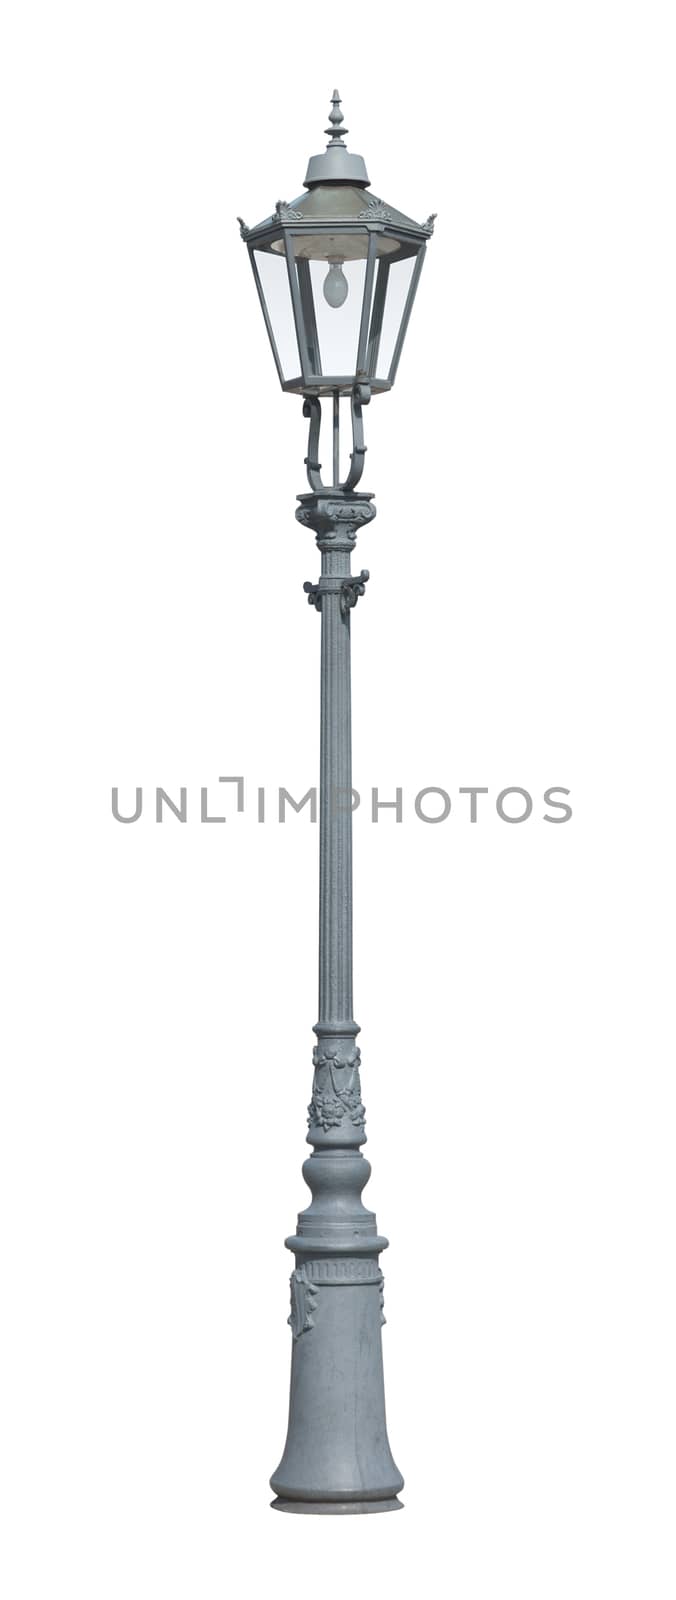 Street light cutout isolated on white background with clipping path